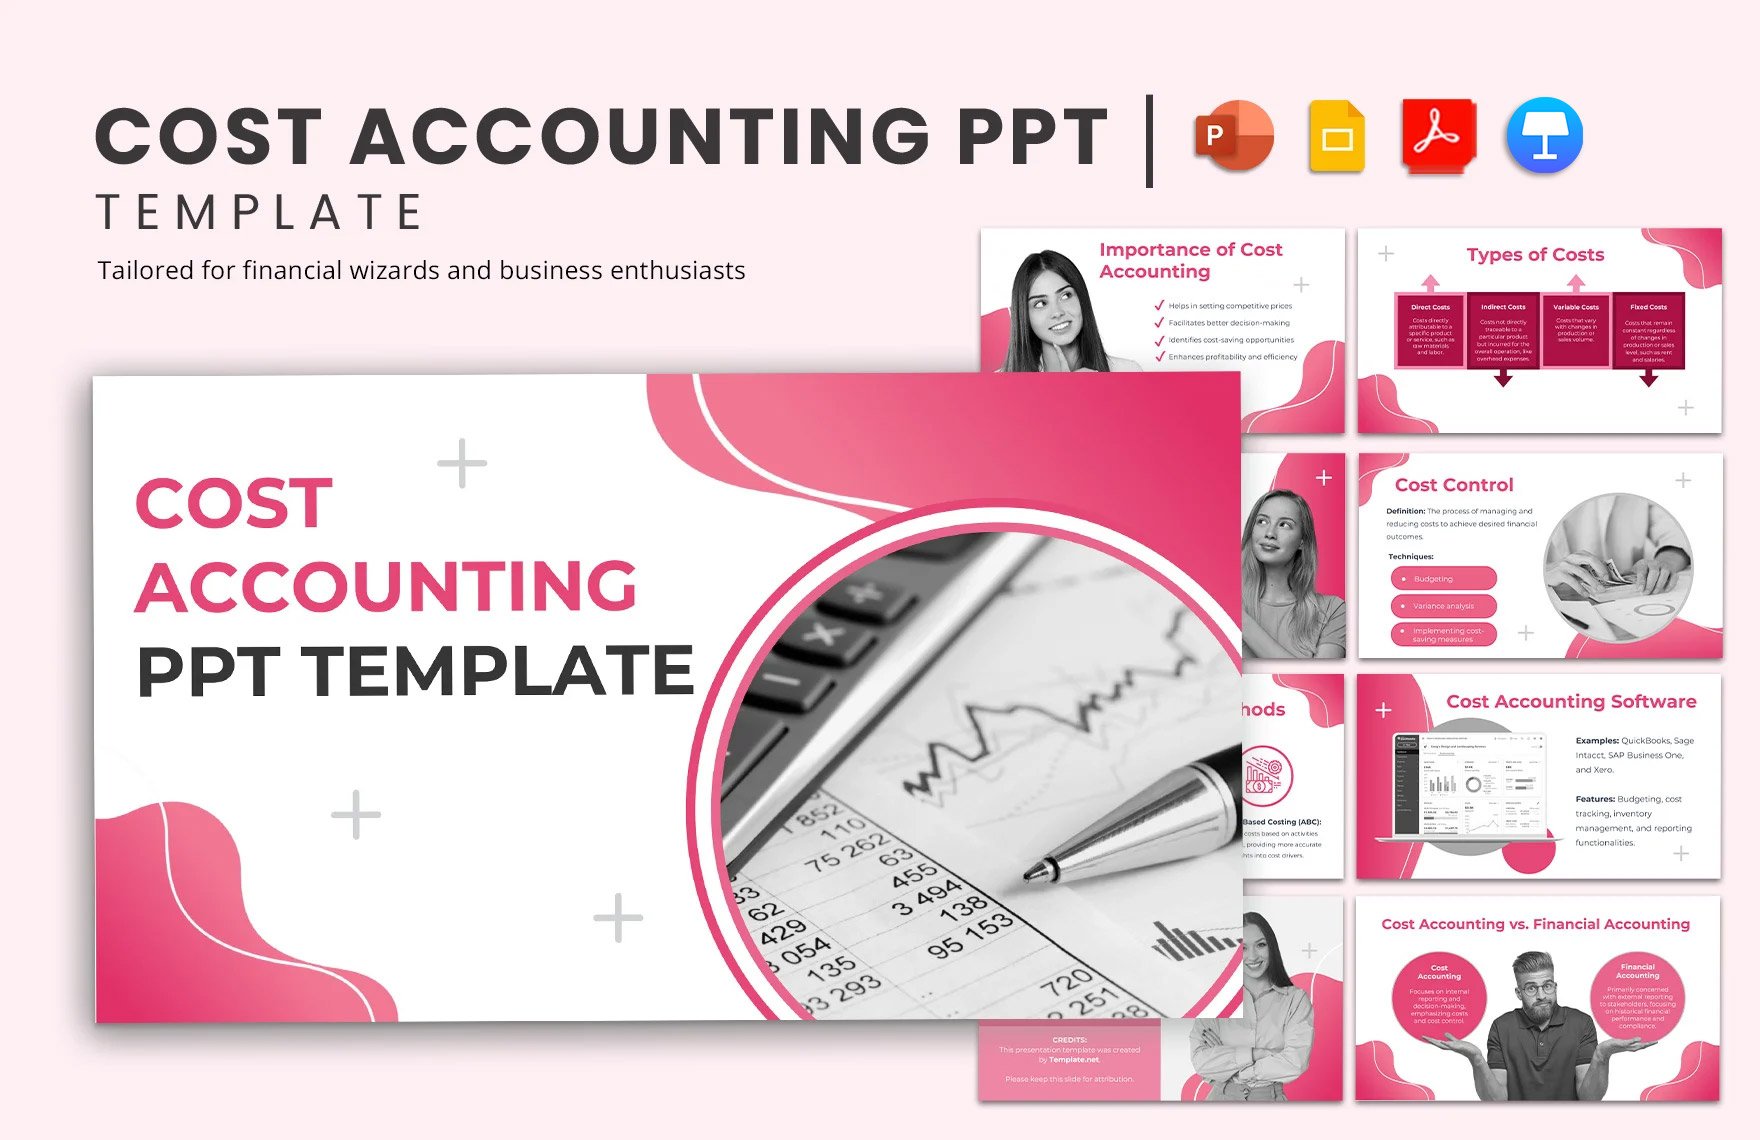 Cost Accounting PPT Template in PDF, PowerPoint, Google Slides, Apple Keynote